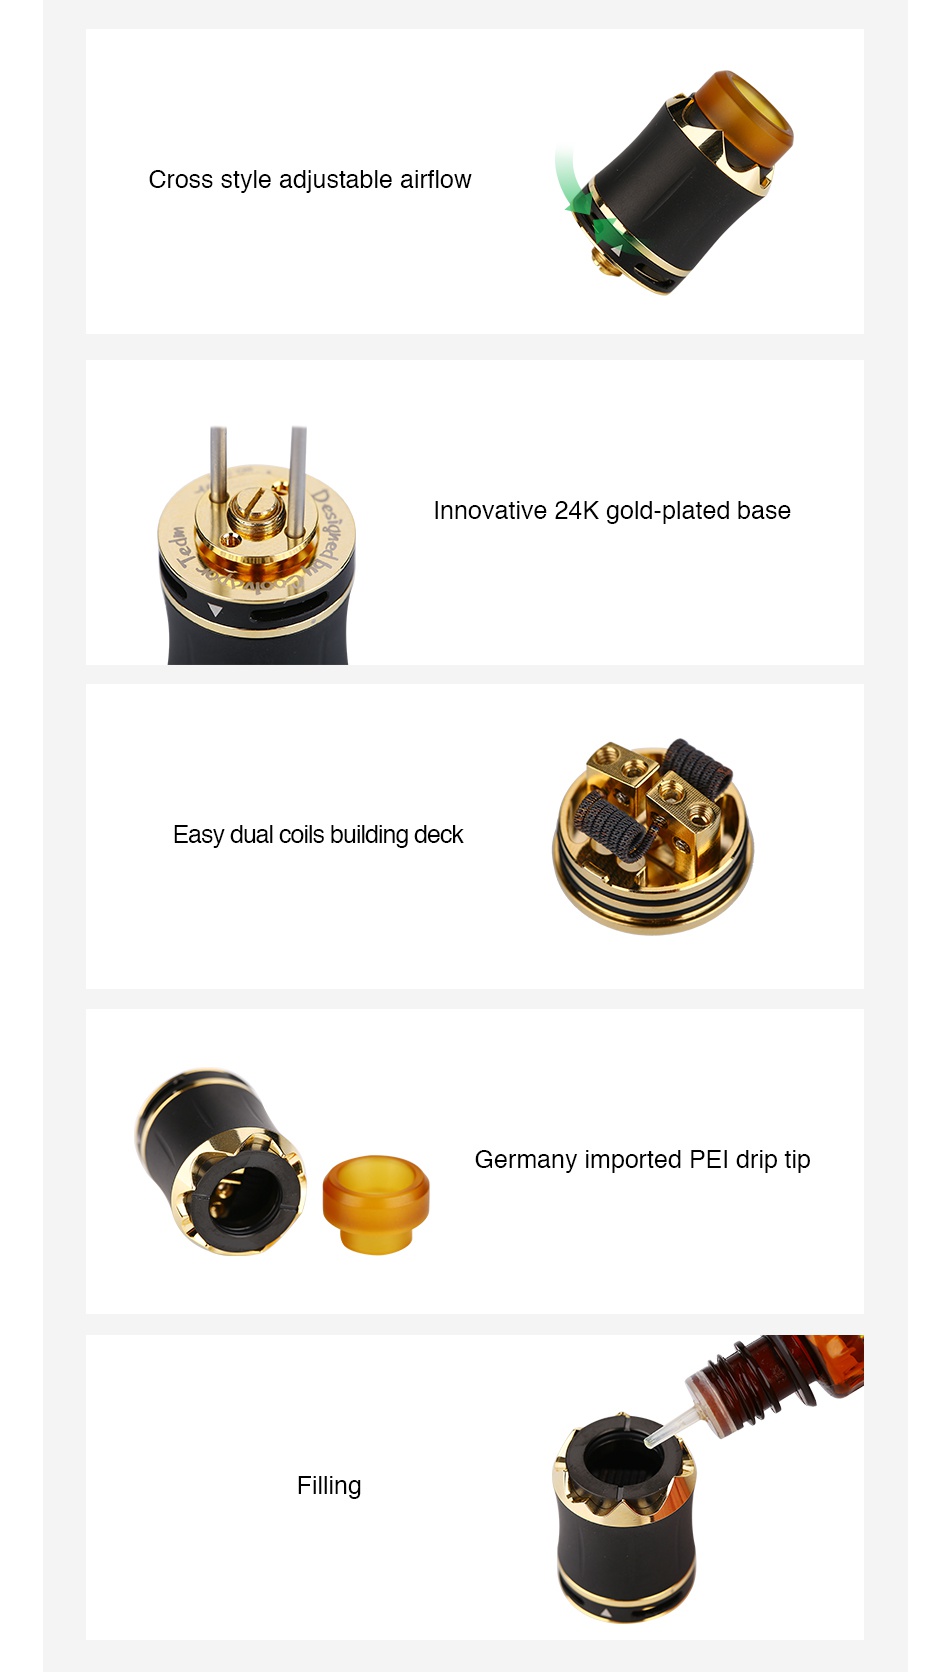 Cool Vapor Arthur RDA Cross style adjustable airflow nnovative 24K gold plated base Easy dual coils building deck Germany imported PEl drip tip